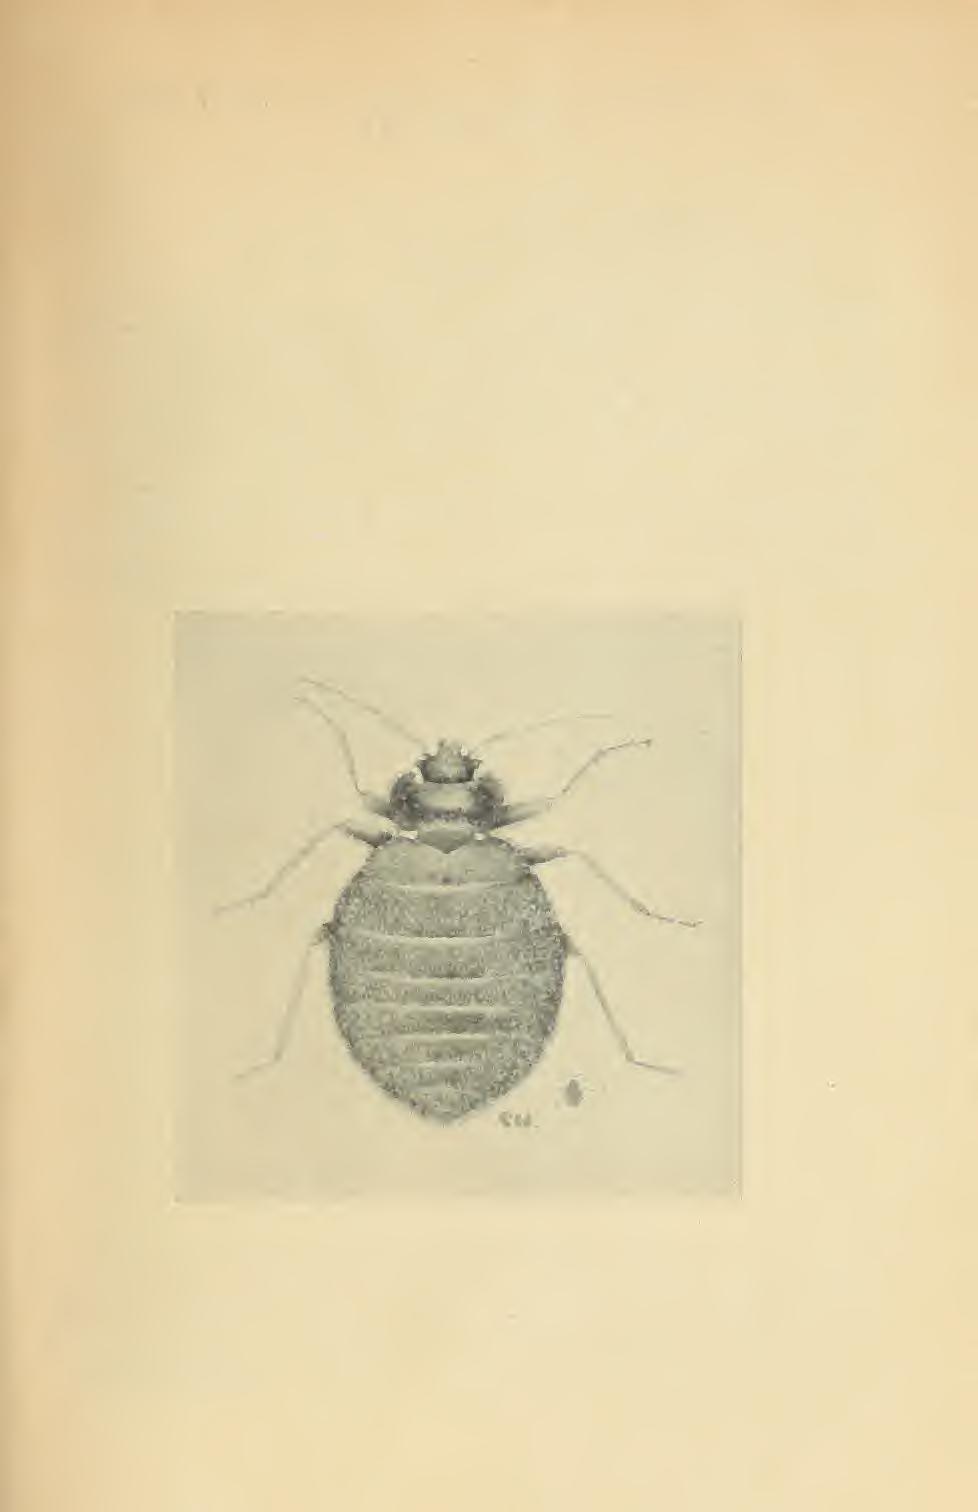 CONTROL OF BEDBUGS, FLEAS, LICE, AND WASPS 1 by C. R.